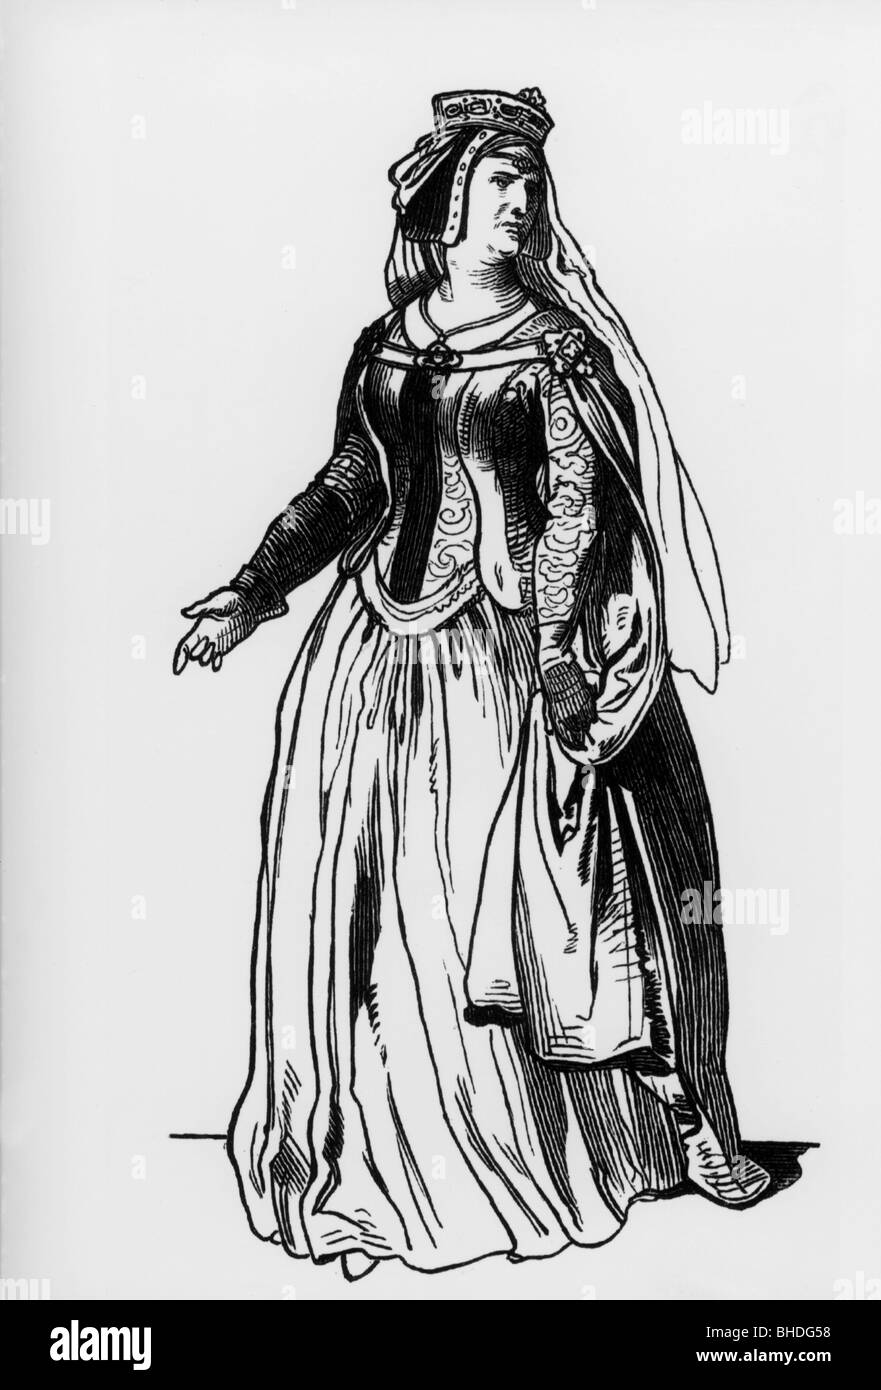 middle ages, people, 'Die Koenigin' (The Queen), illustration from 'Muenchner Bilderbogen' (Munich Sheet of Pictures), wood engraving, 19th century, Stock Photo